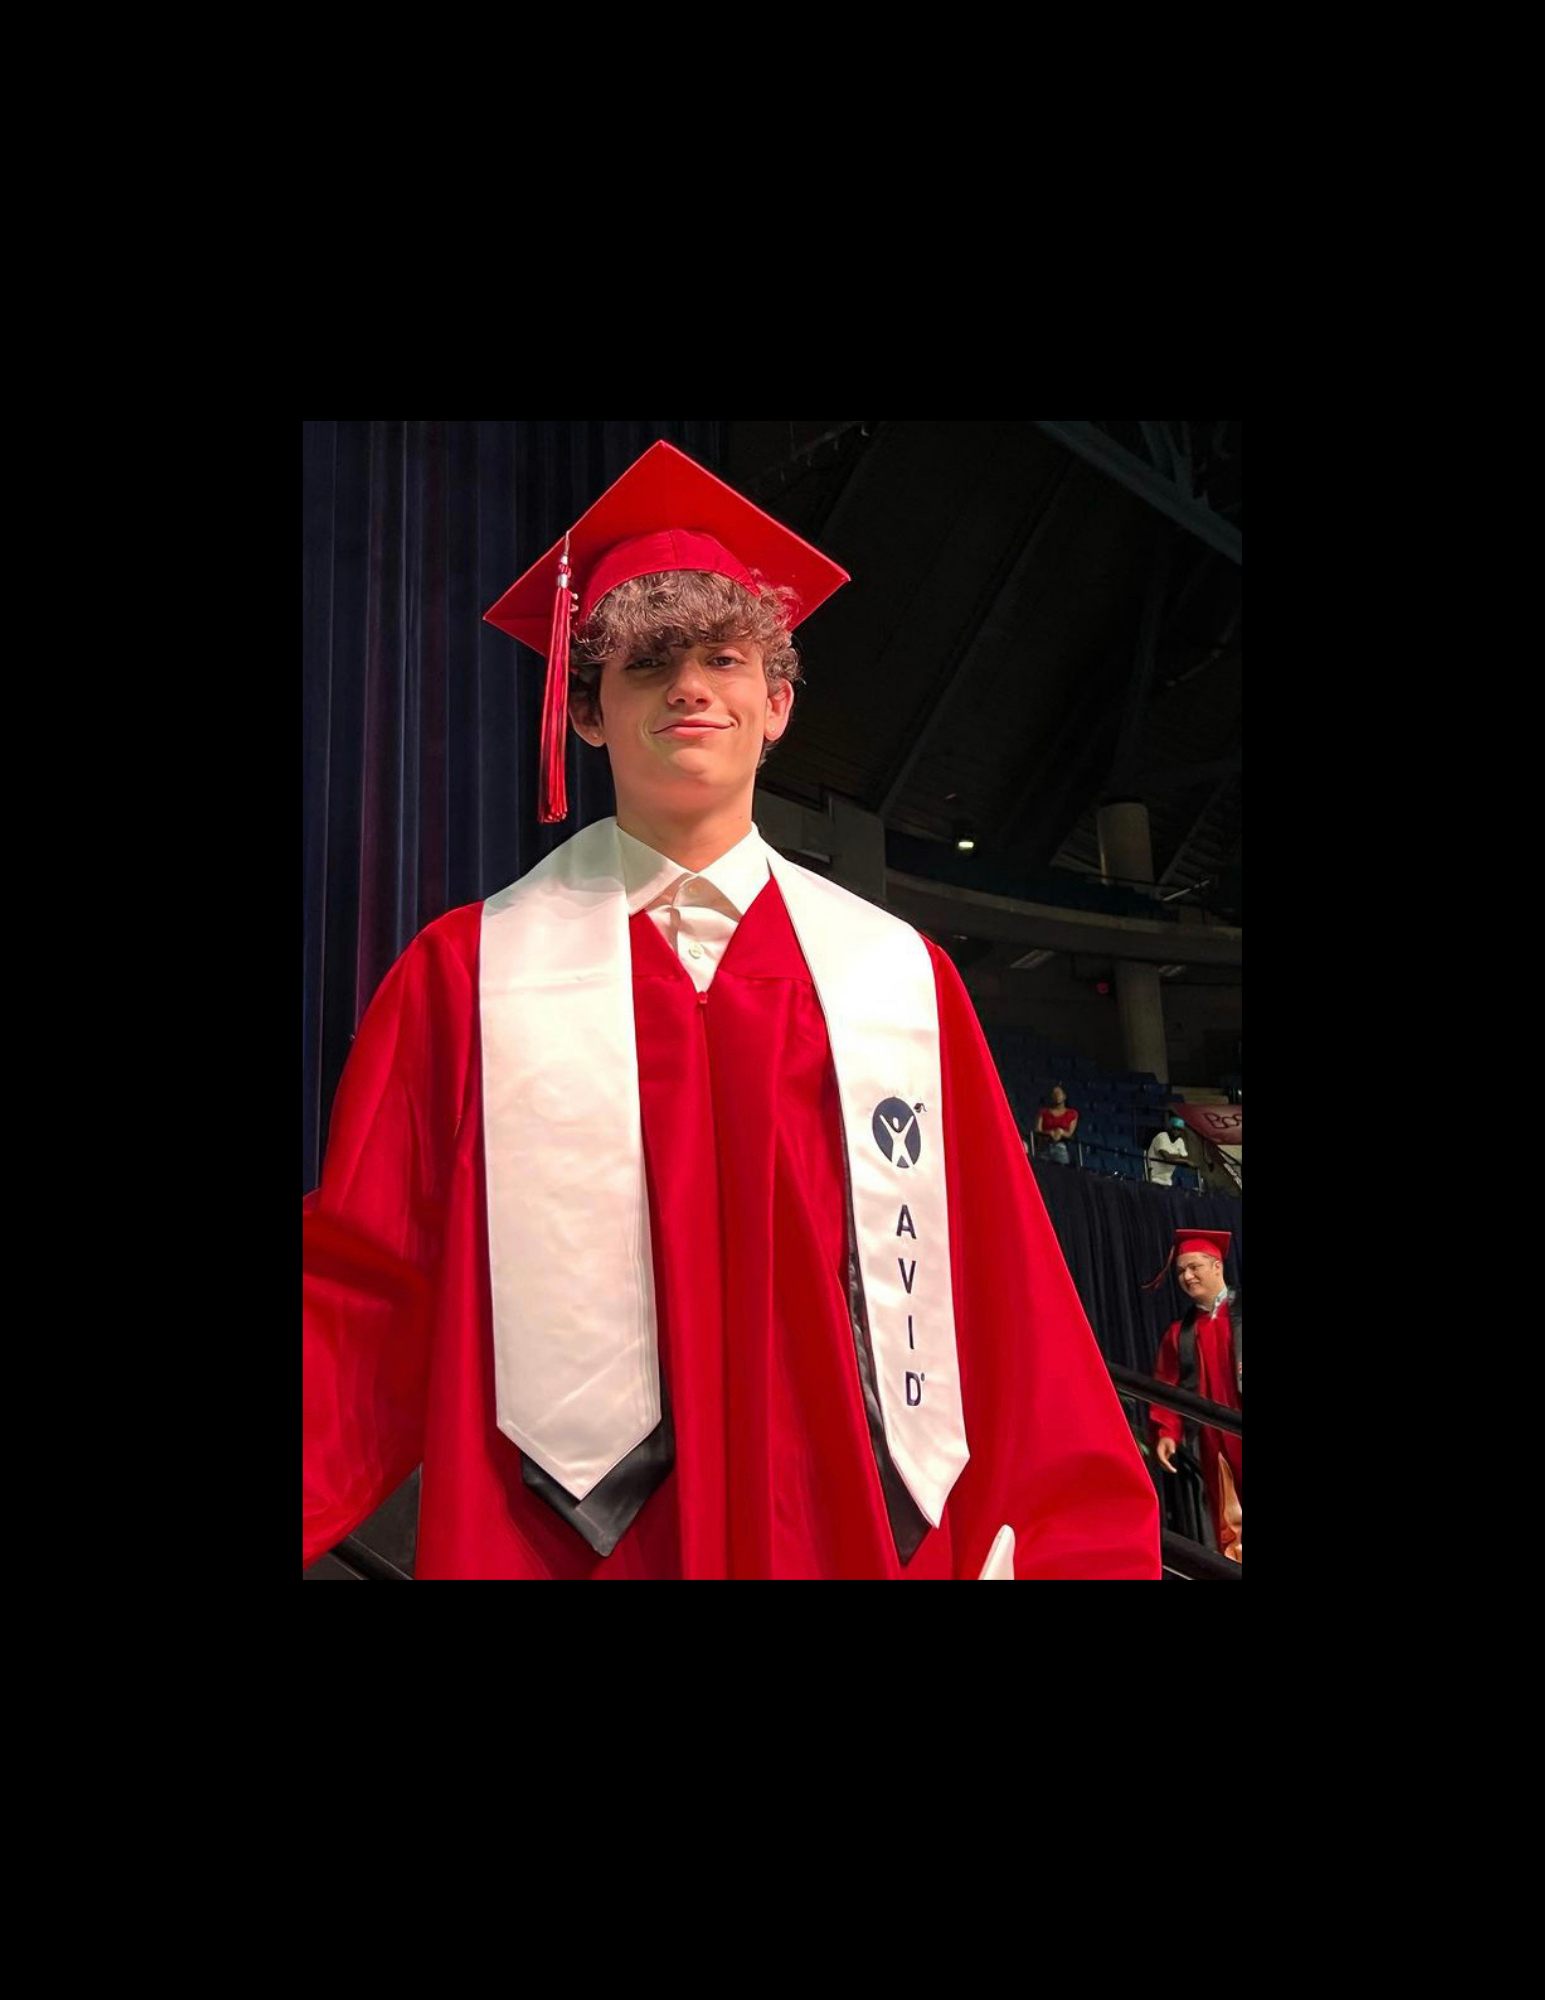 Springfield High Student Graduating with AVID Stole